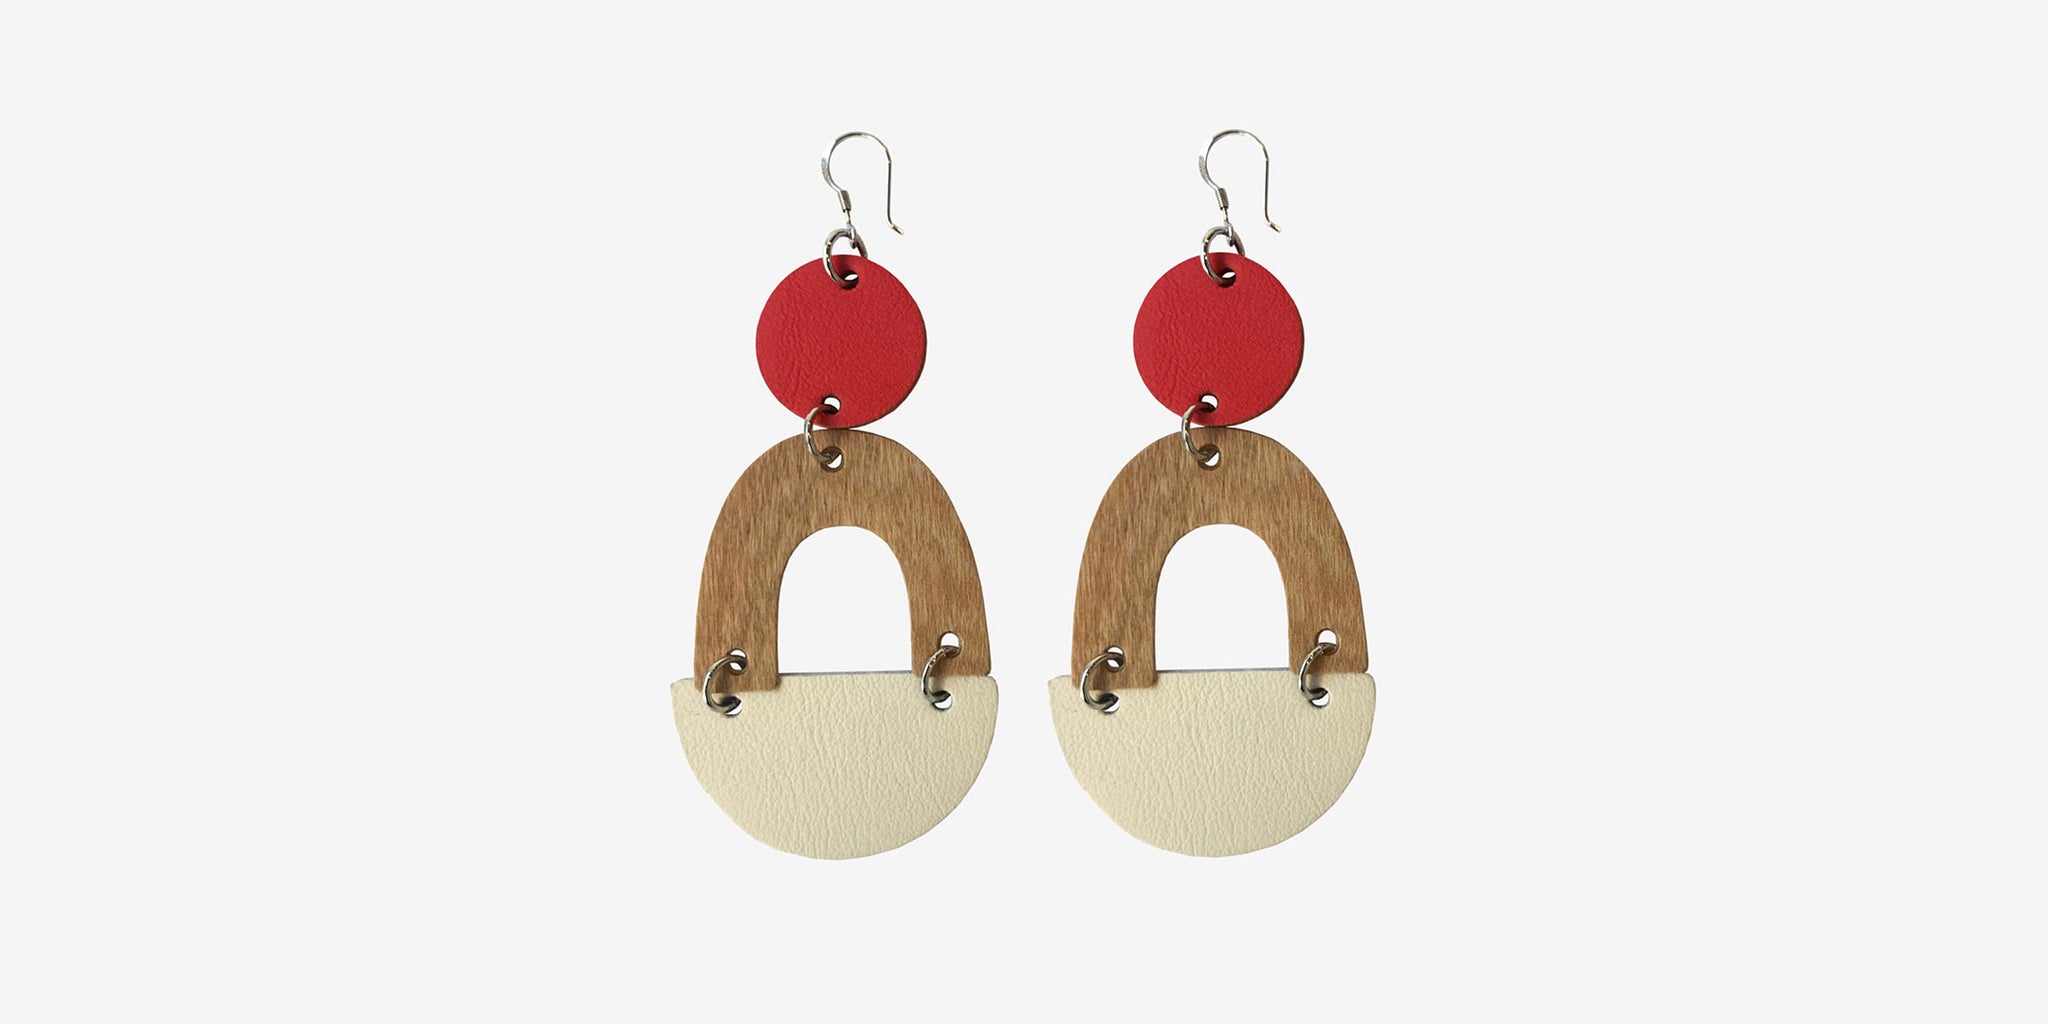 Mantra earrings – red/white